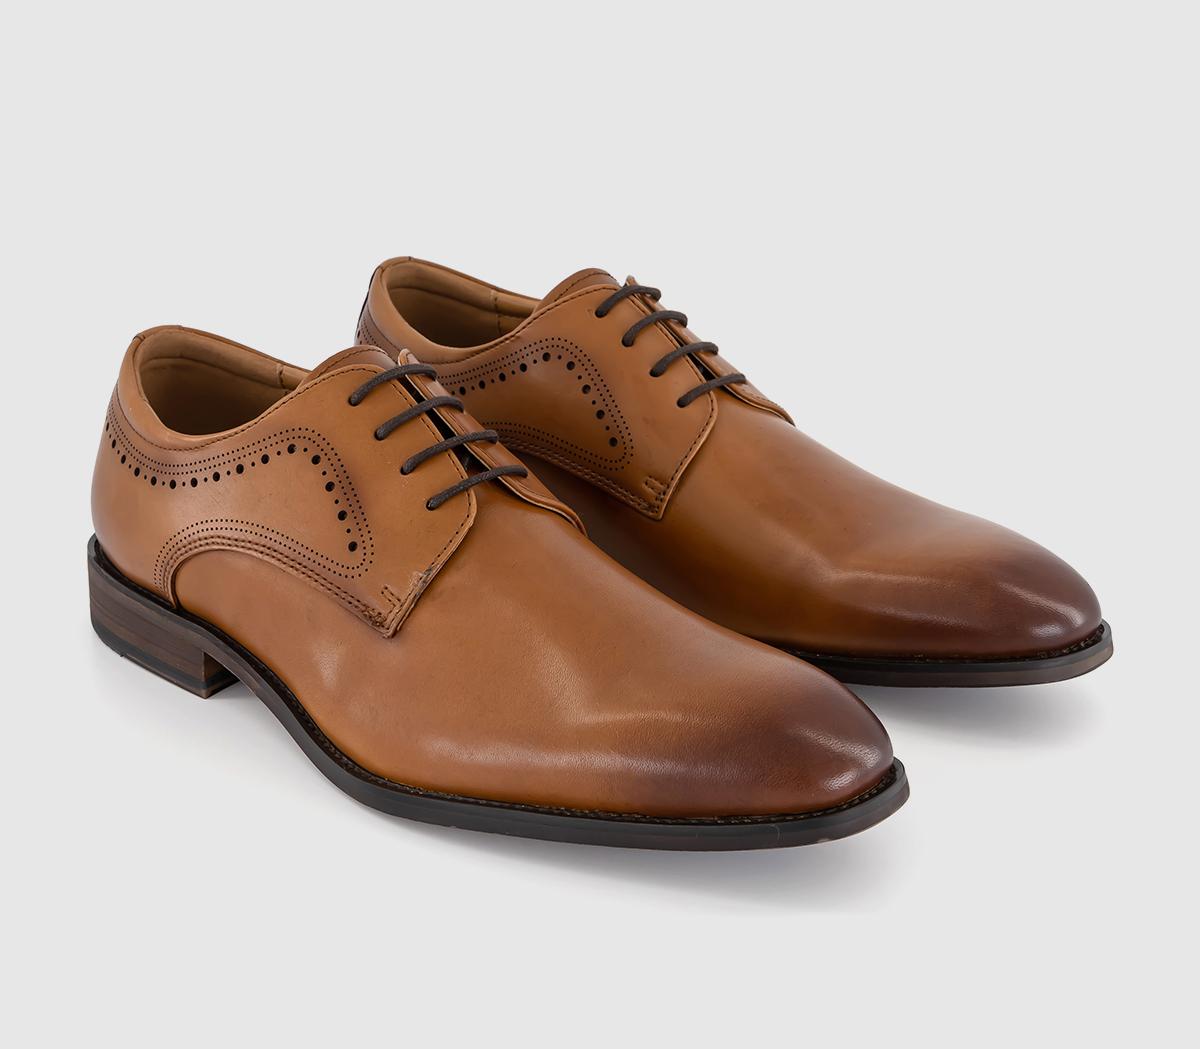 OFFICE Milo Brogue Panel Leather Derby Shoes Tan, 8